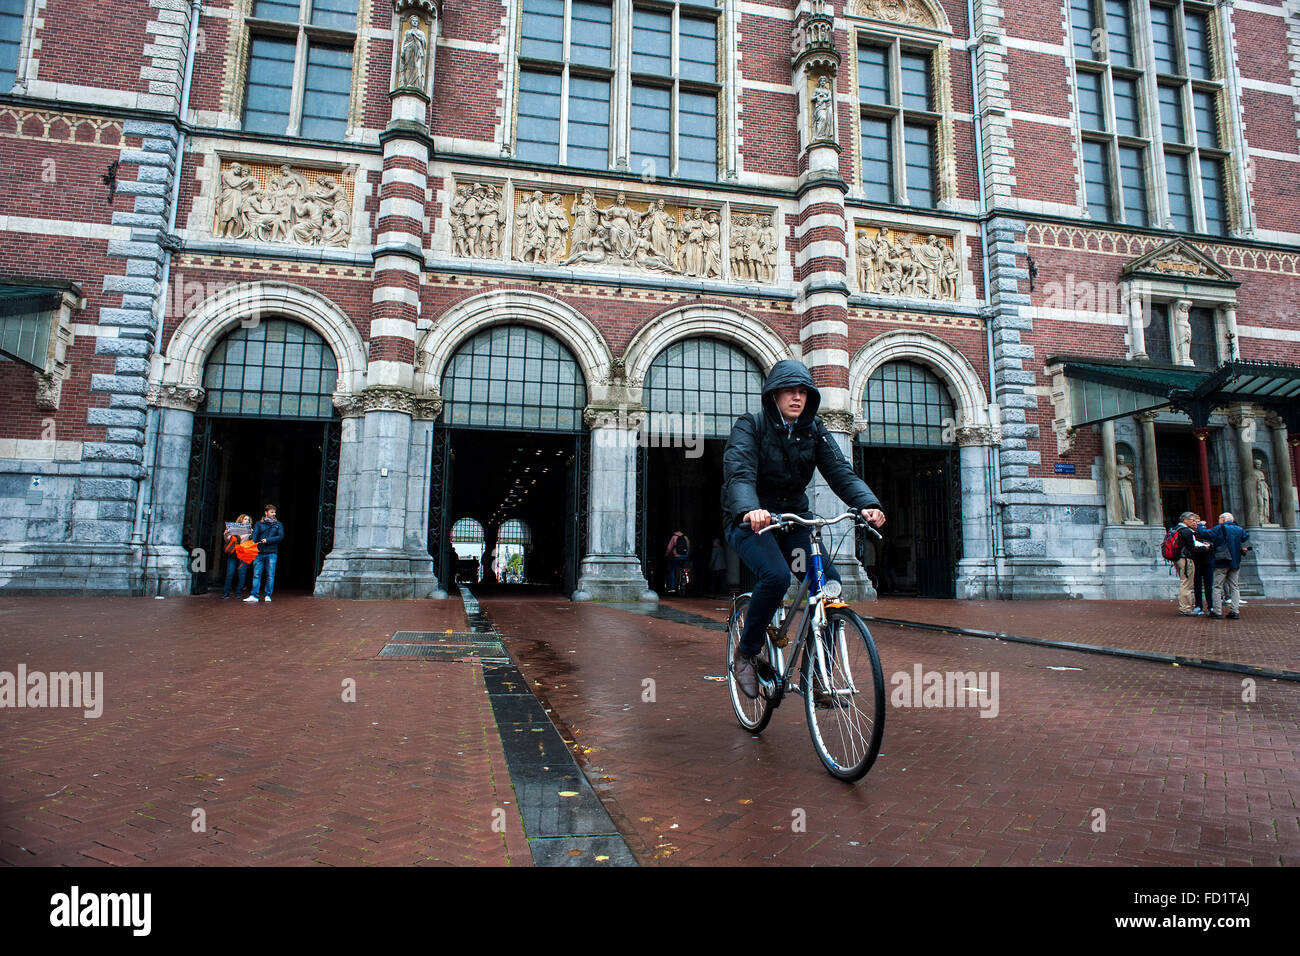 A young woman spends a bike in front of the entrance to the Rijksmuseum one of the architectural jewels of Amsterdam Stock Photo